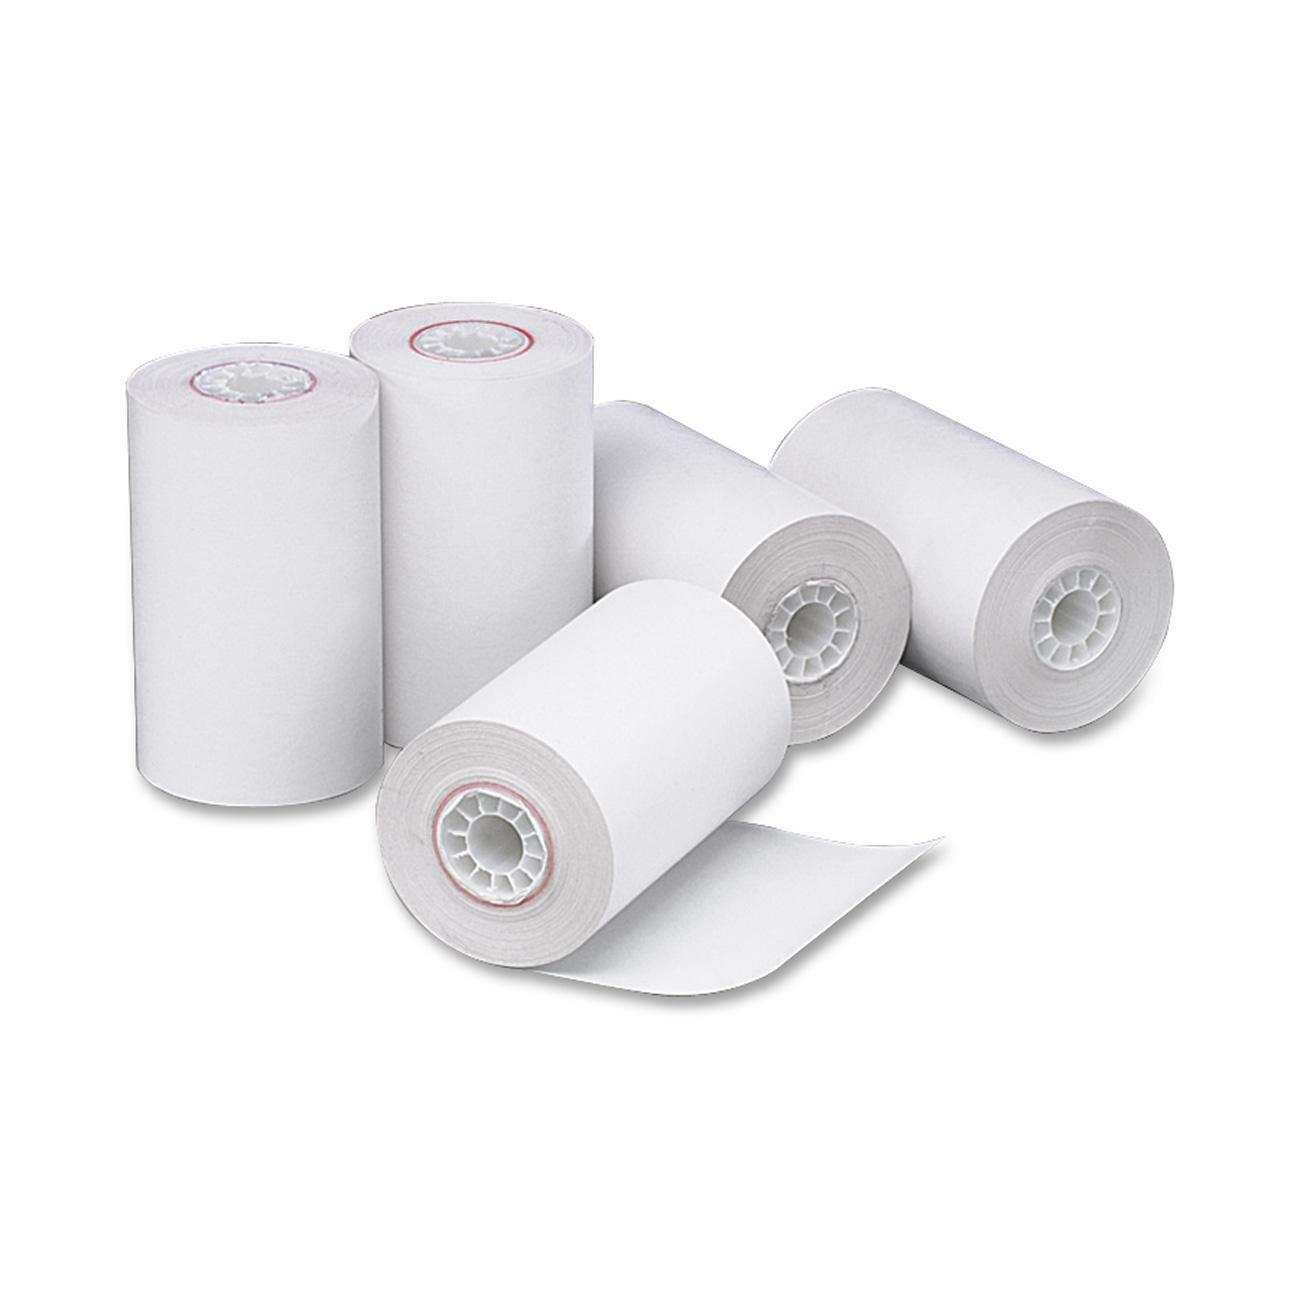 NCR 2032012BUS Direct Thermal Print Receipt Paper -12/Rolls